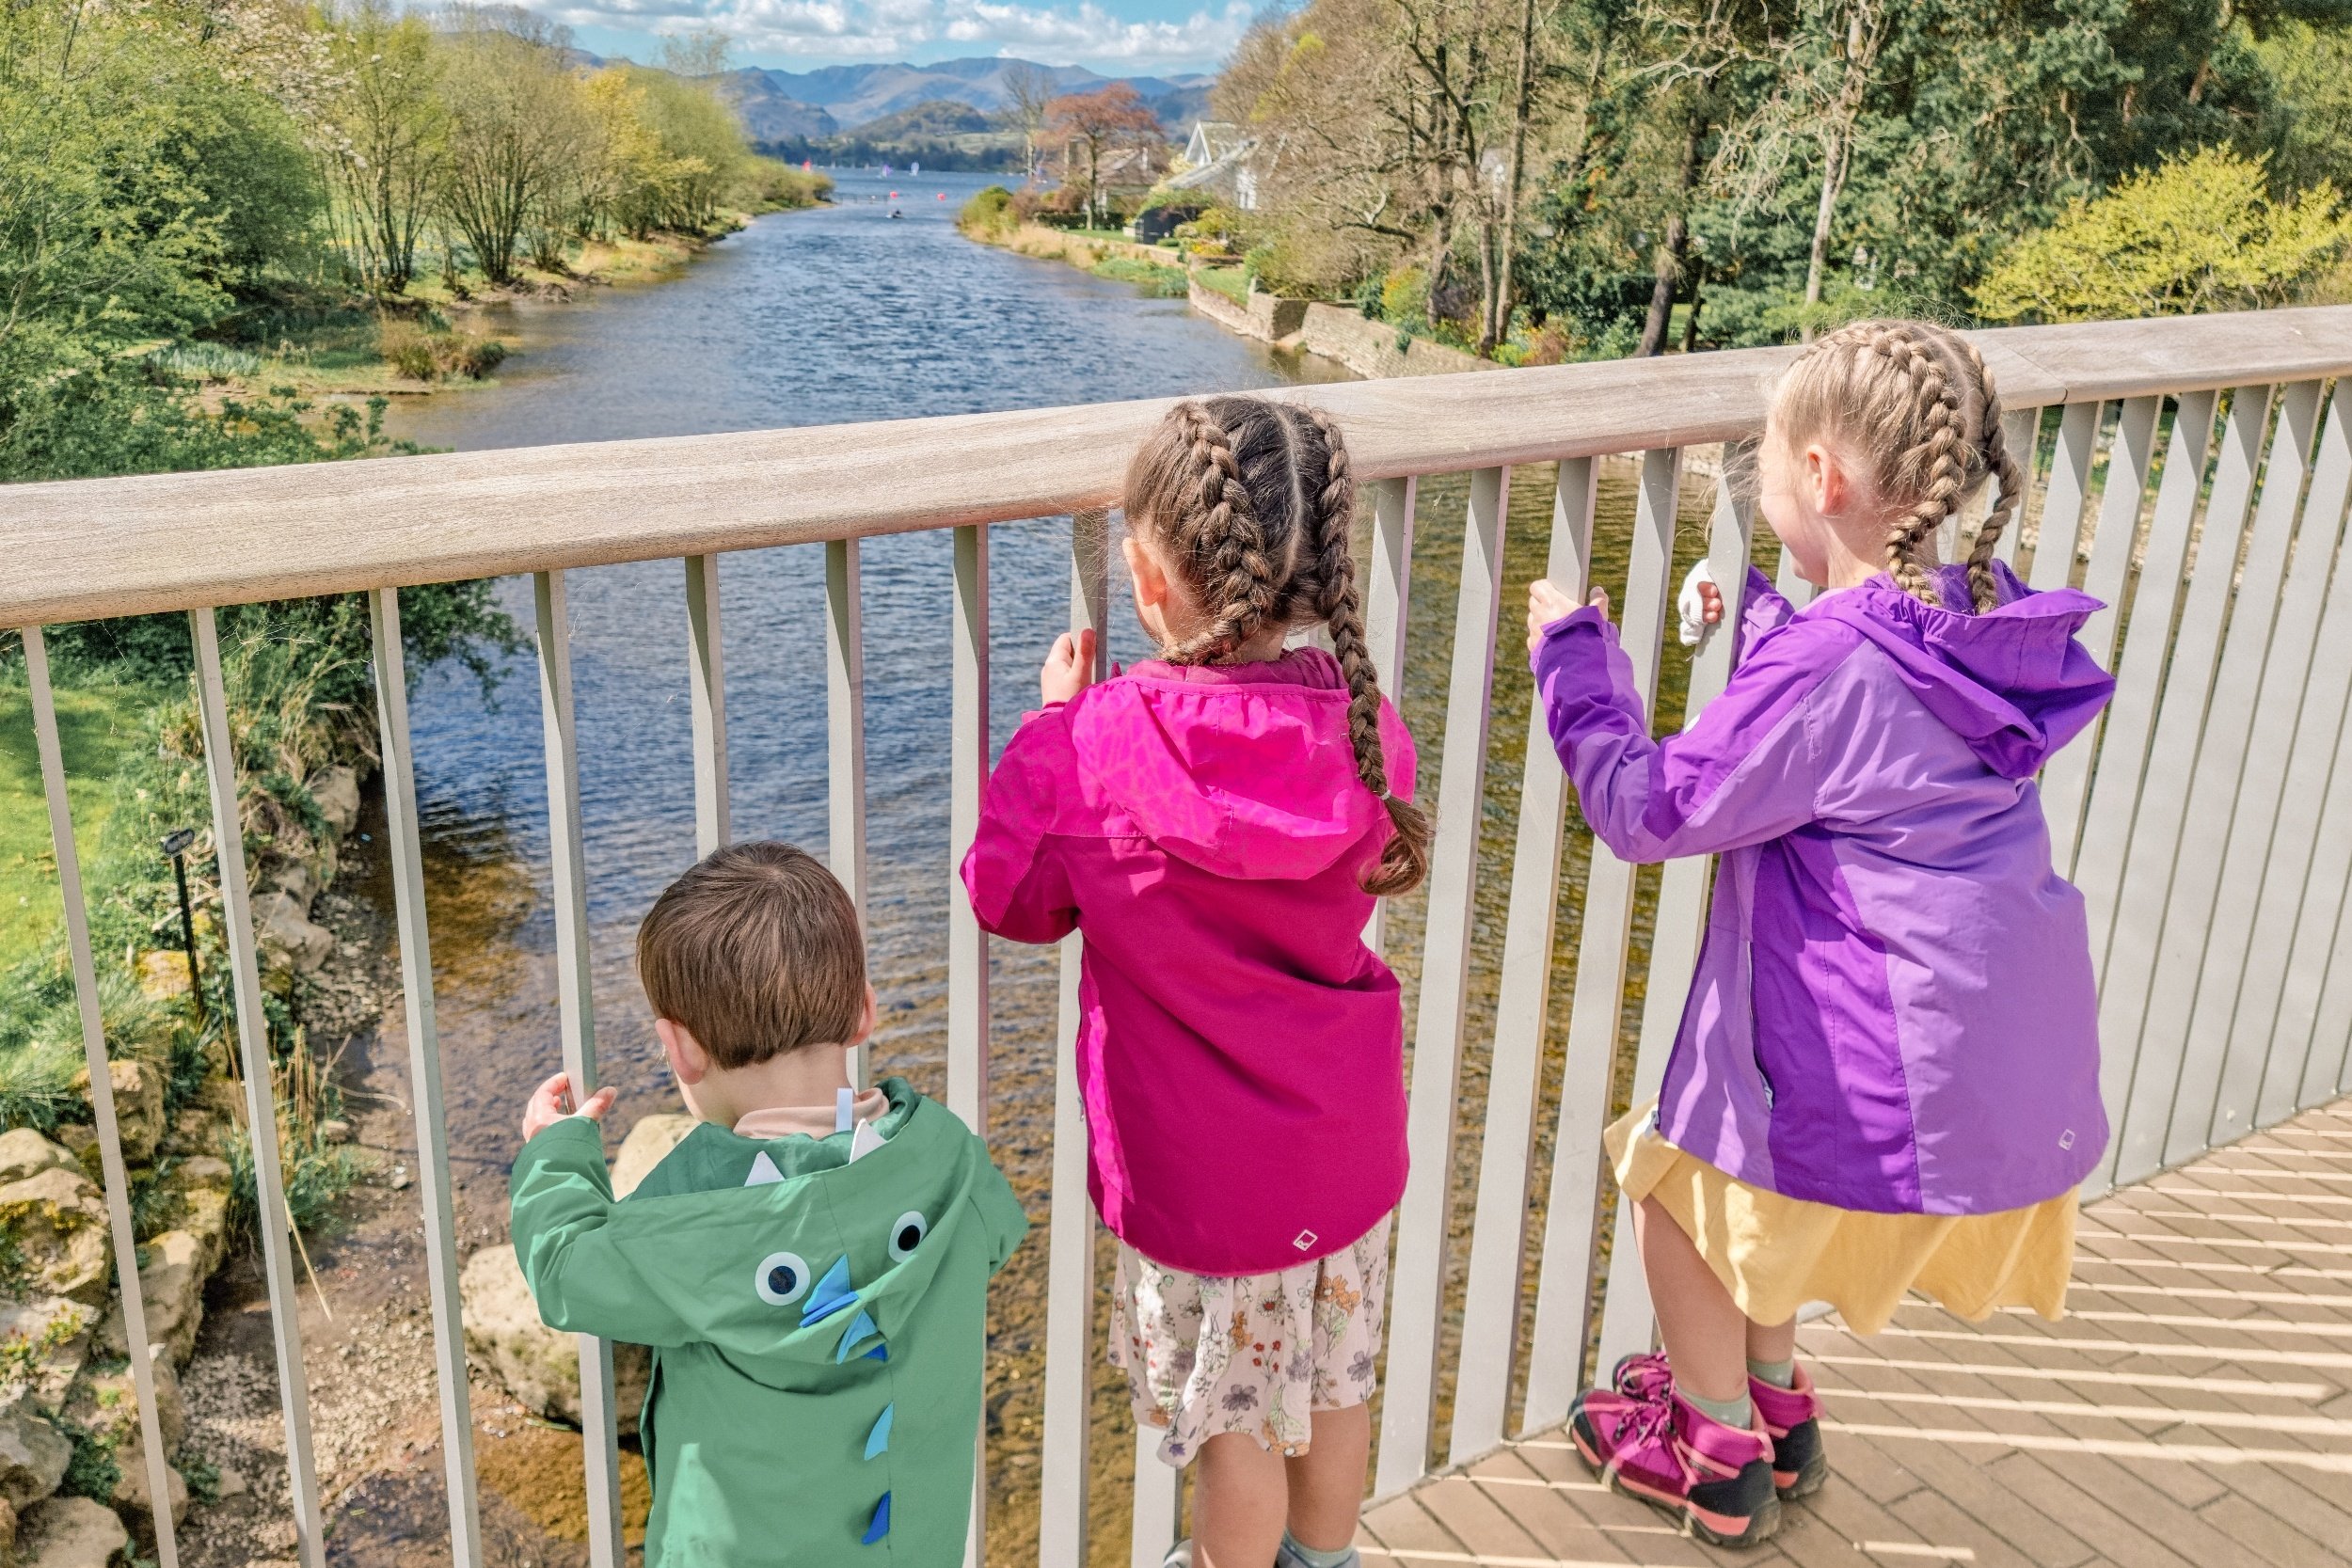 Squidgy, Pickle and Munchkin are stood on Pooley Bridge, holding onto the bars  looking down at River Eamont.